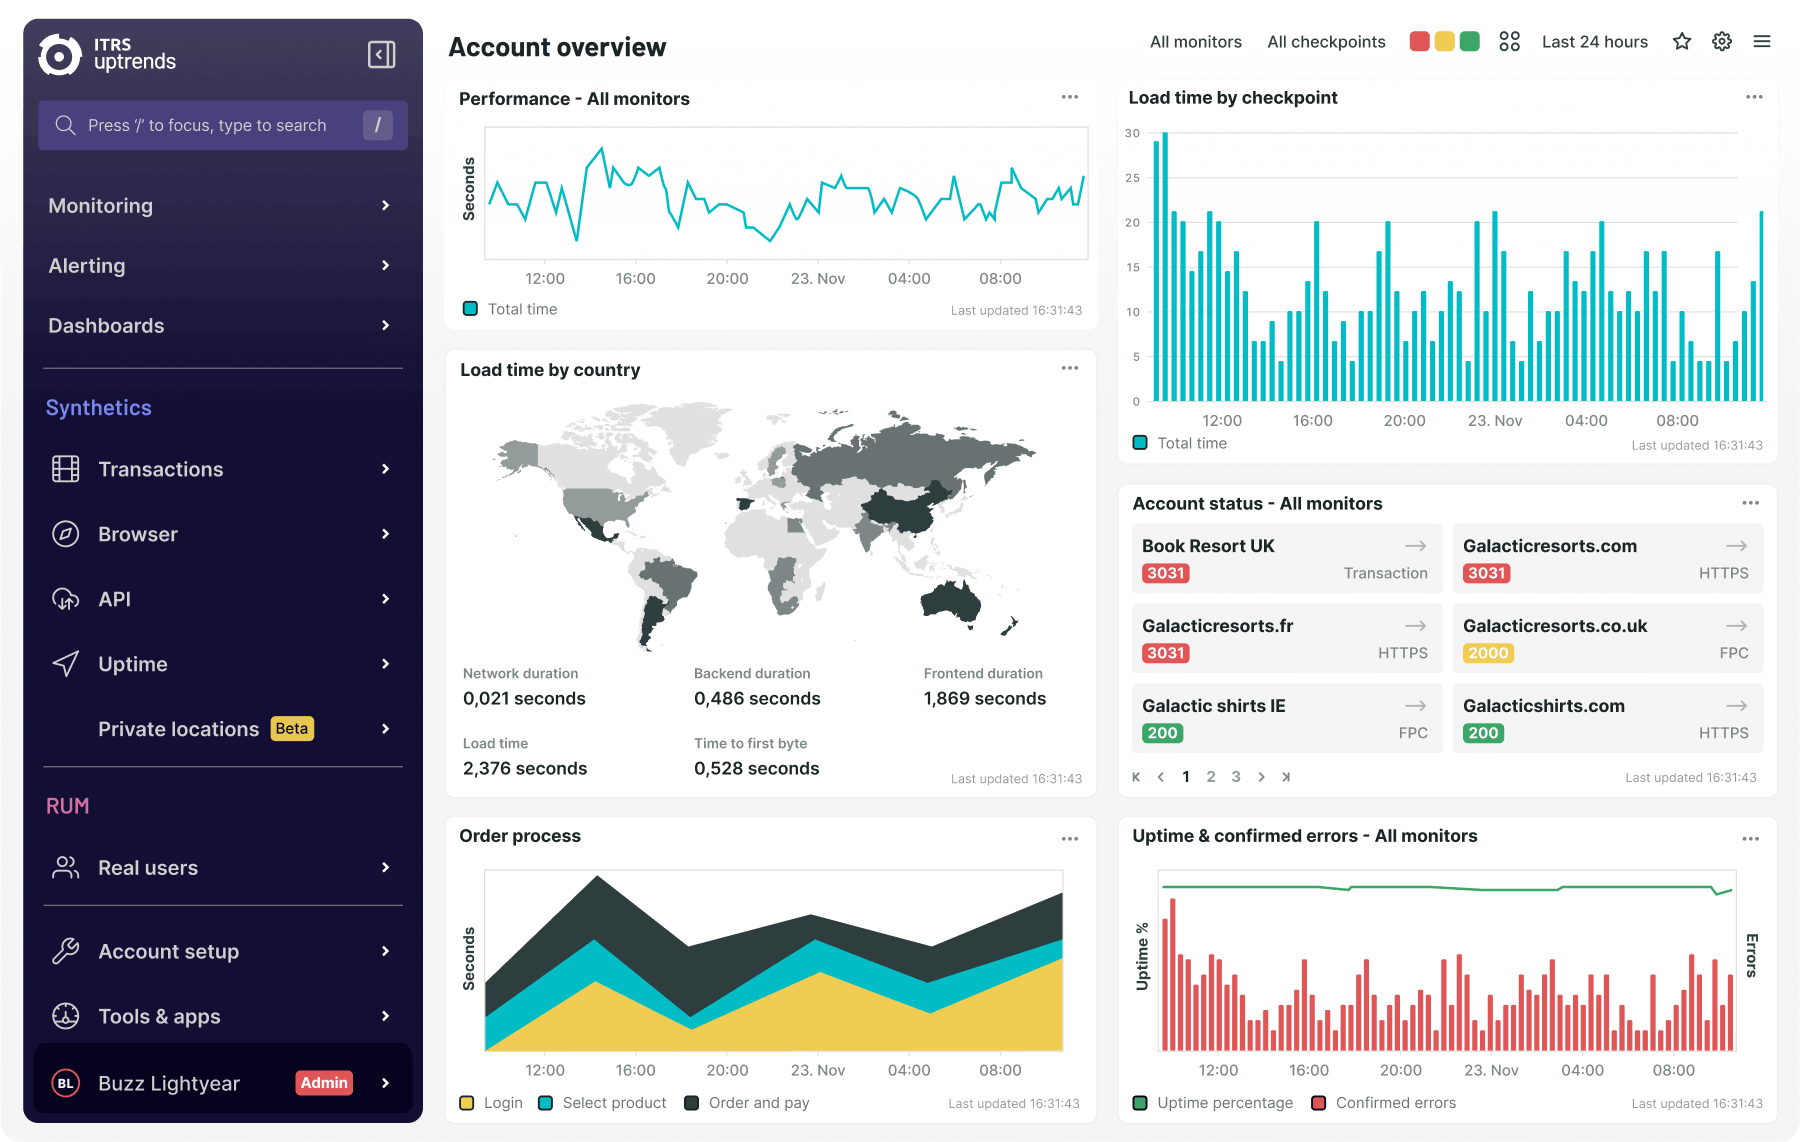 Dashboard monitoring overview of performance, load times, uptime and errors